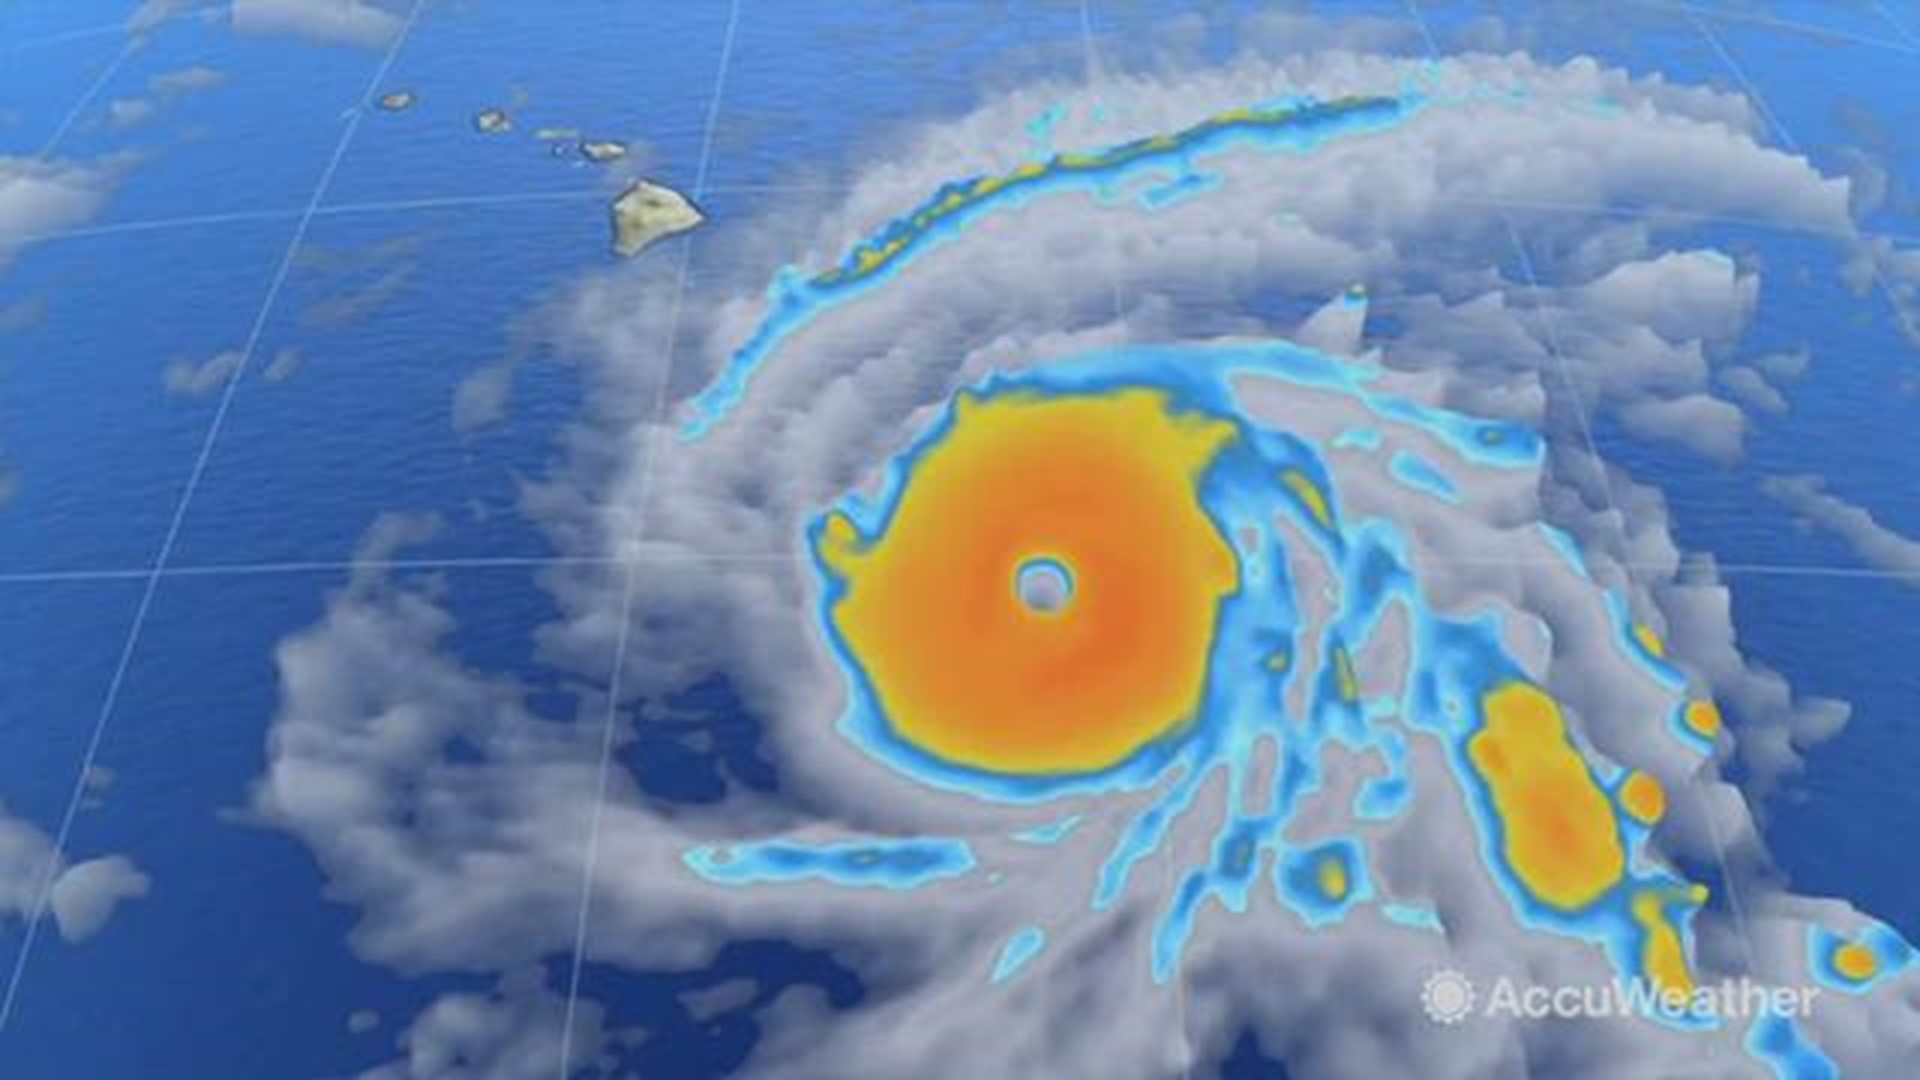 Major Hurricane Lane is forecast to close in on Hawaii later this week. It will threaten lives and property on the islands due to pounding surf, flash flooding, mudslides and strong winds.